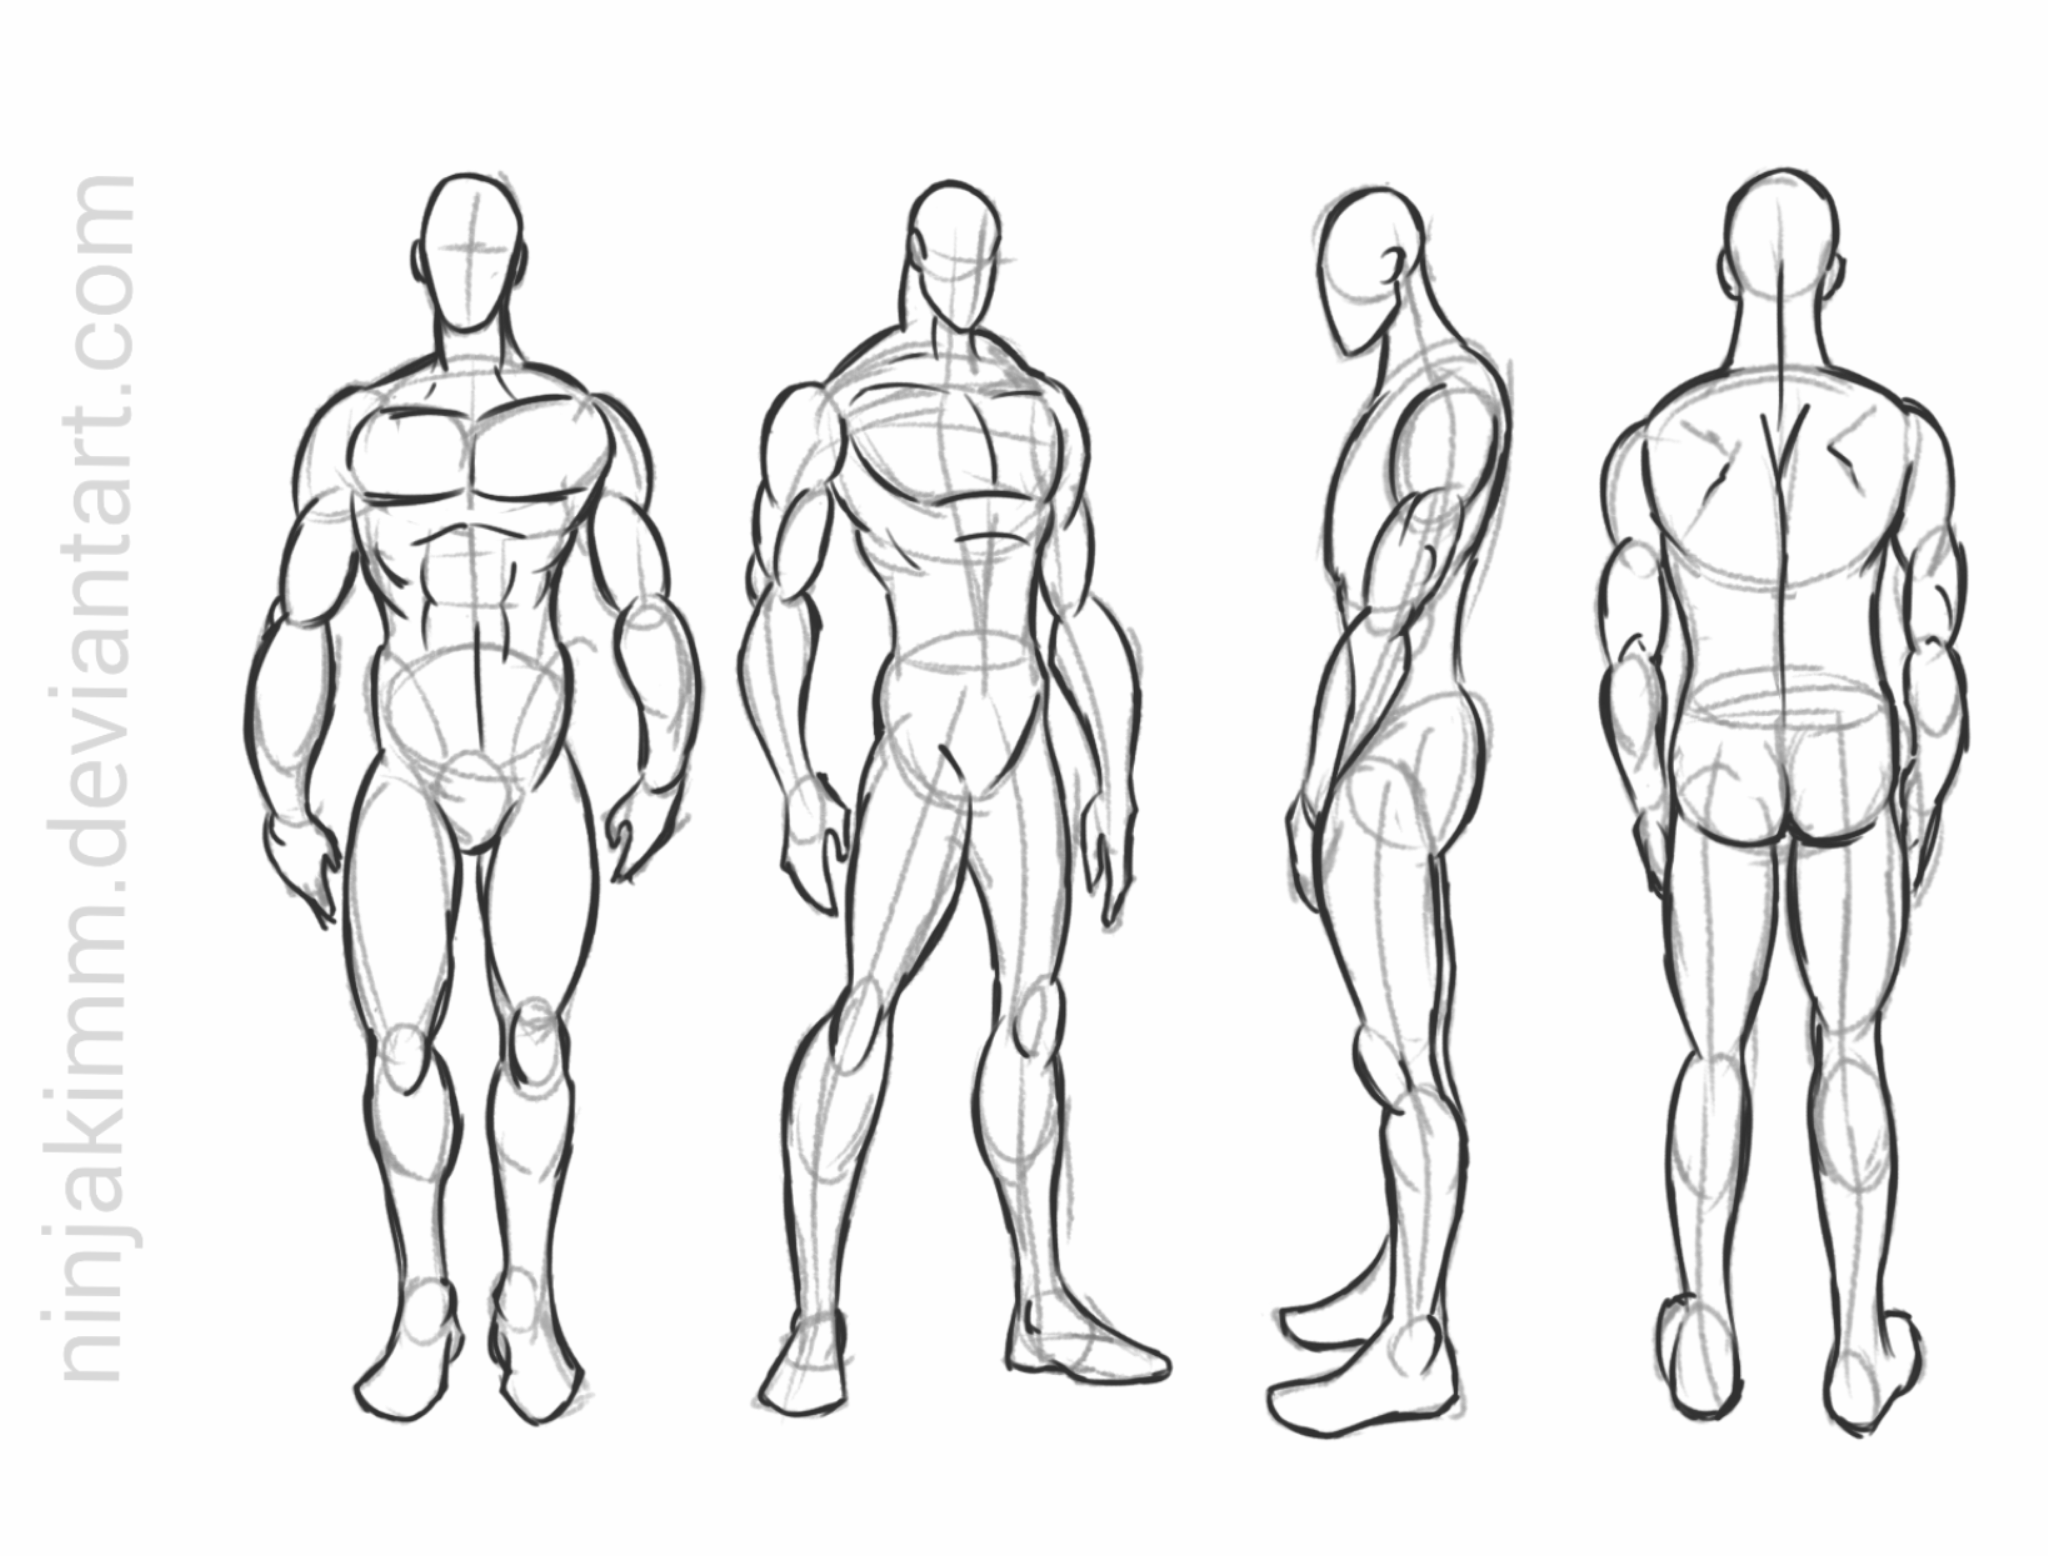 male standing pose (commission sketch) by ninjakimm on DeviantArt. 